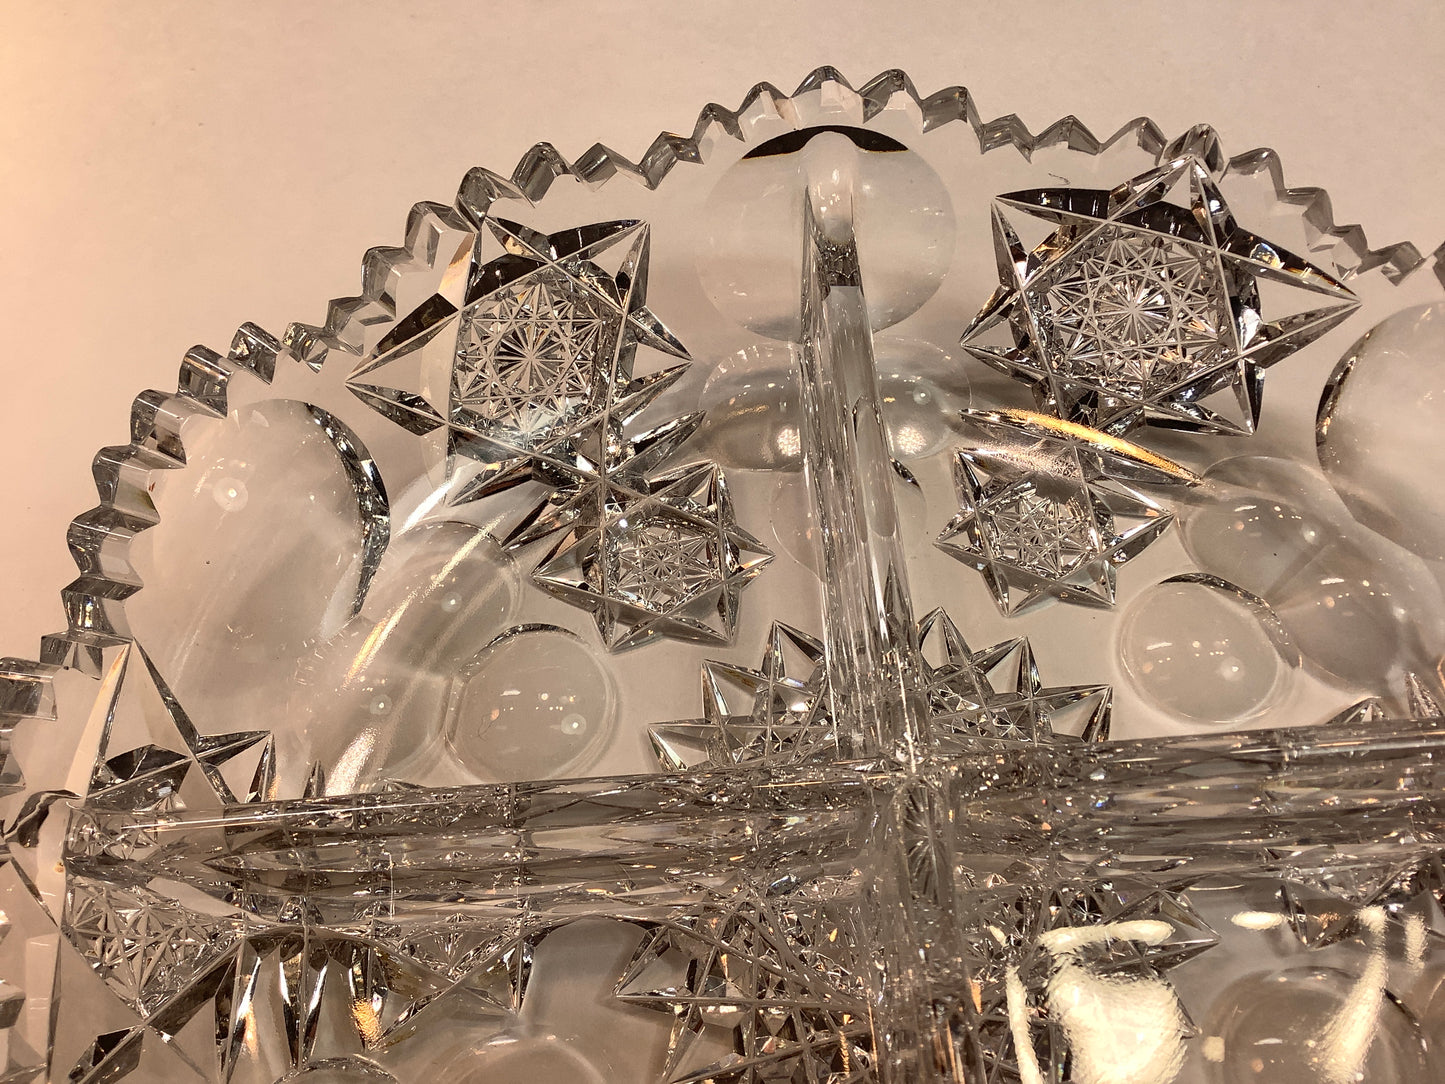 ABP cut glass 4 section dish antique crystal